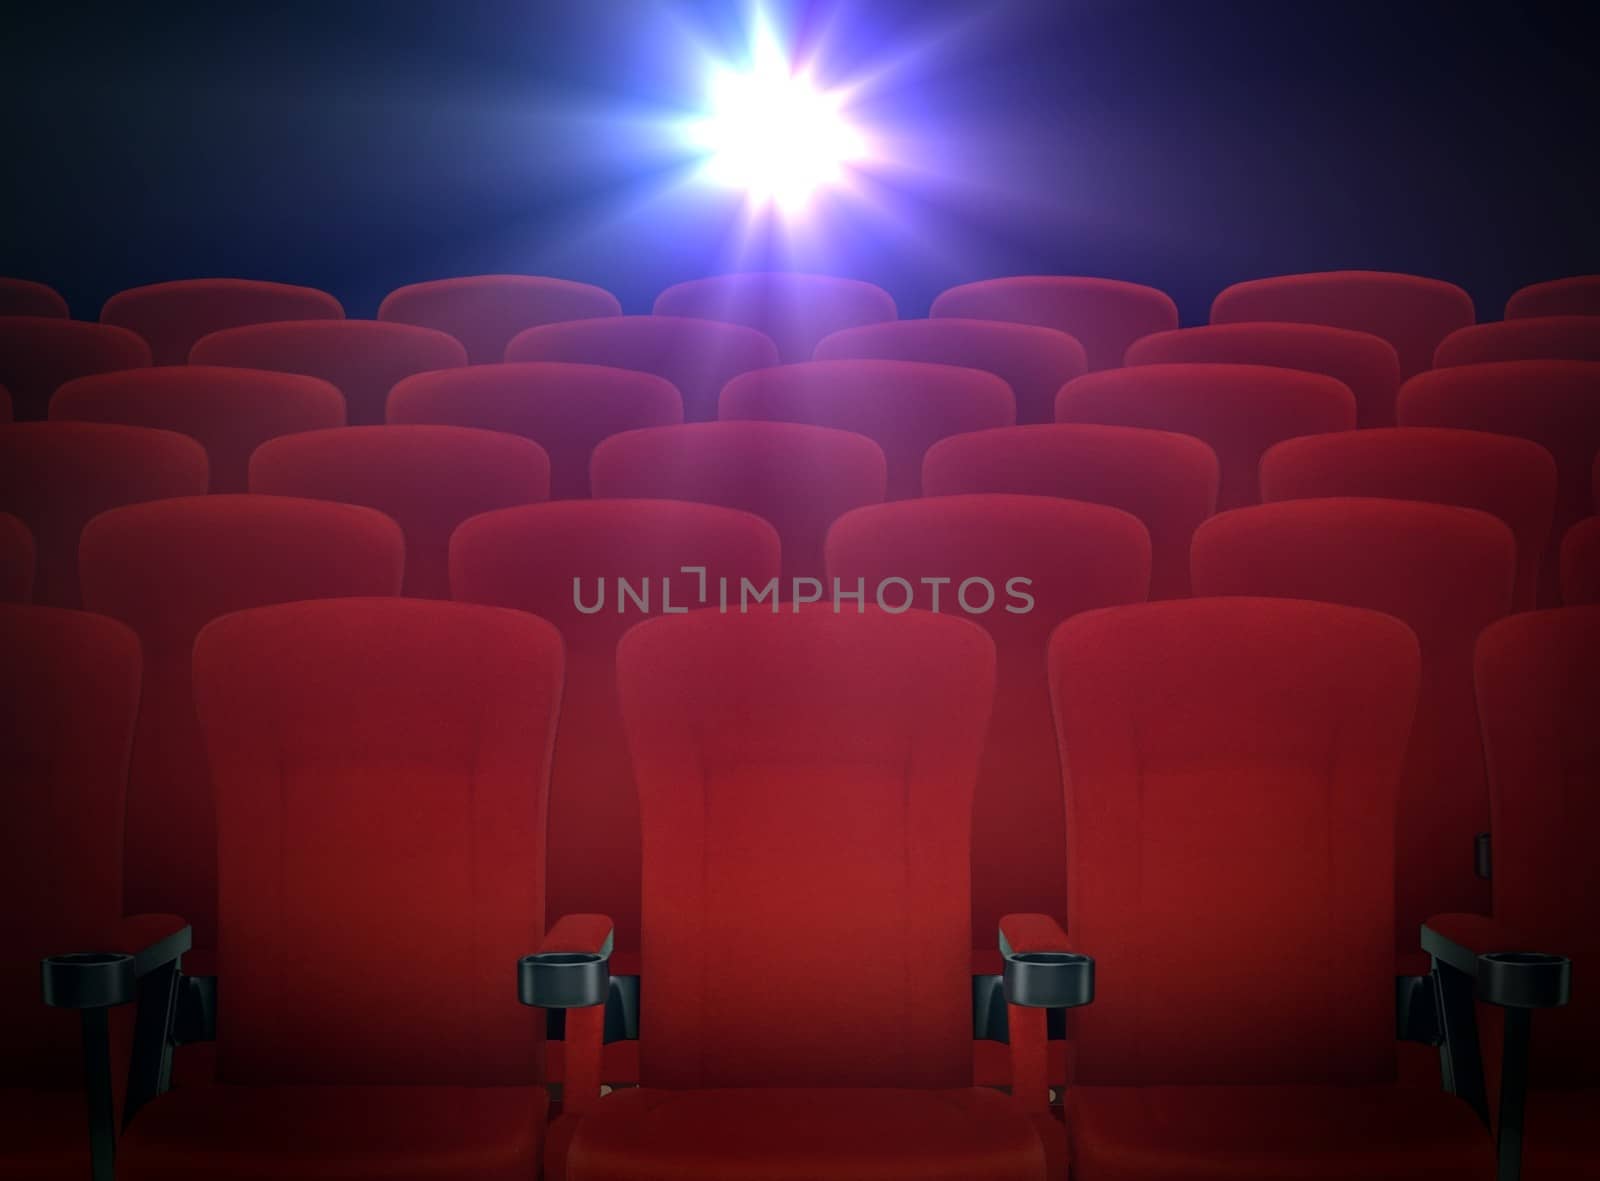 Cinema Red Seats with Projector Lights by razihusin